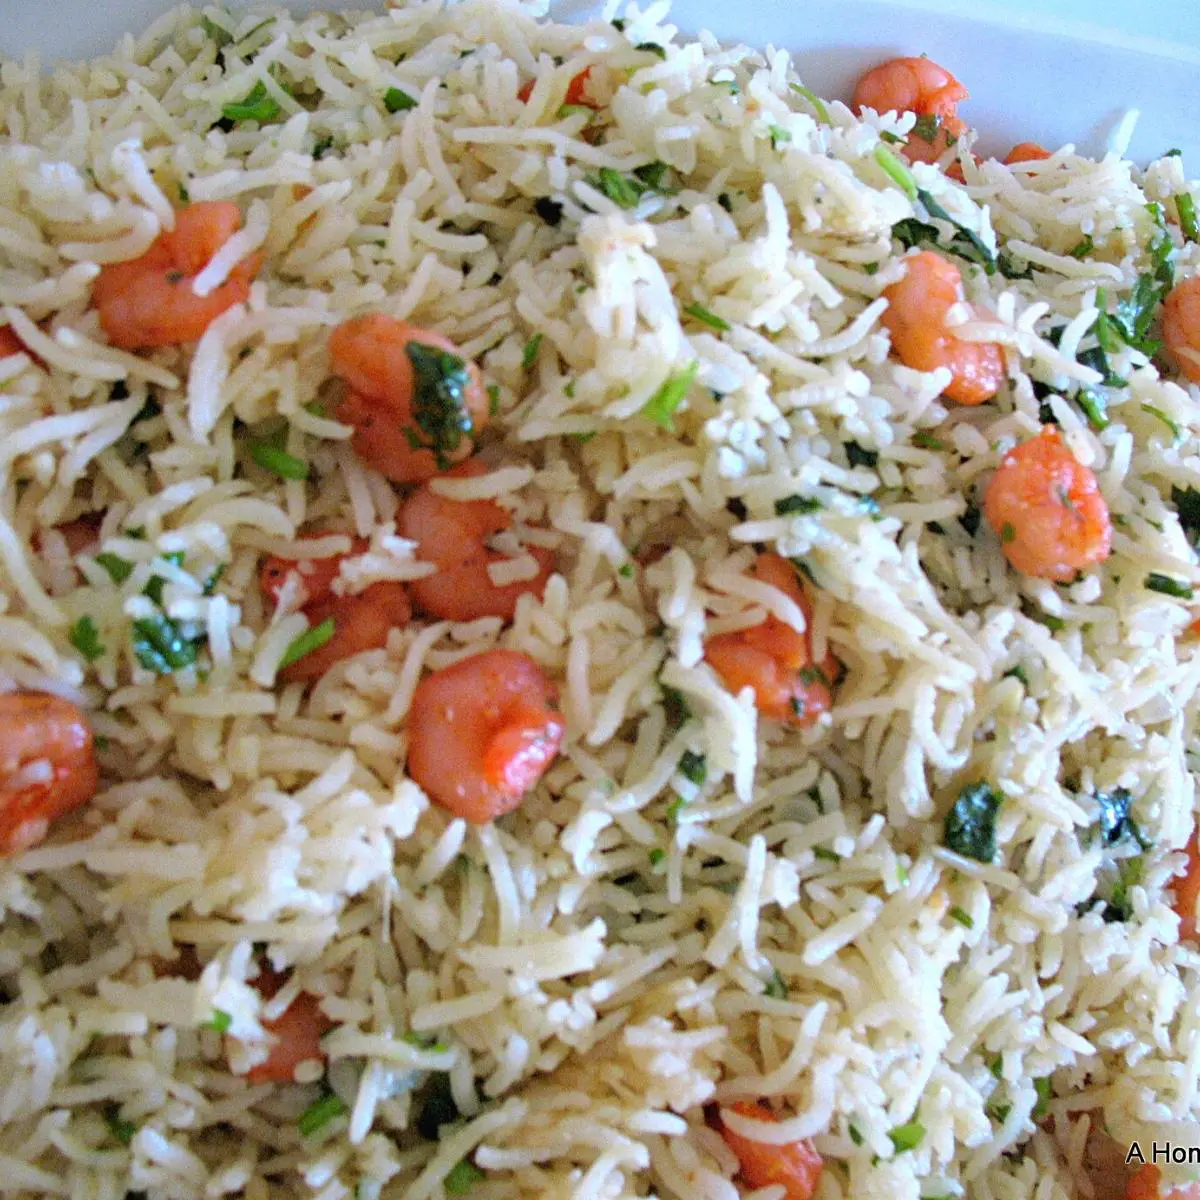 A plate with prawn pulao.